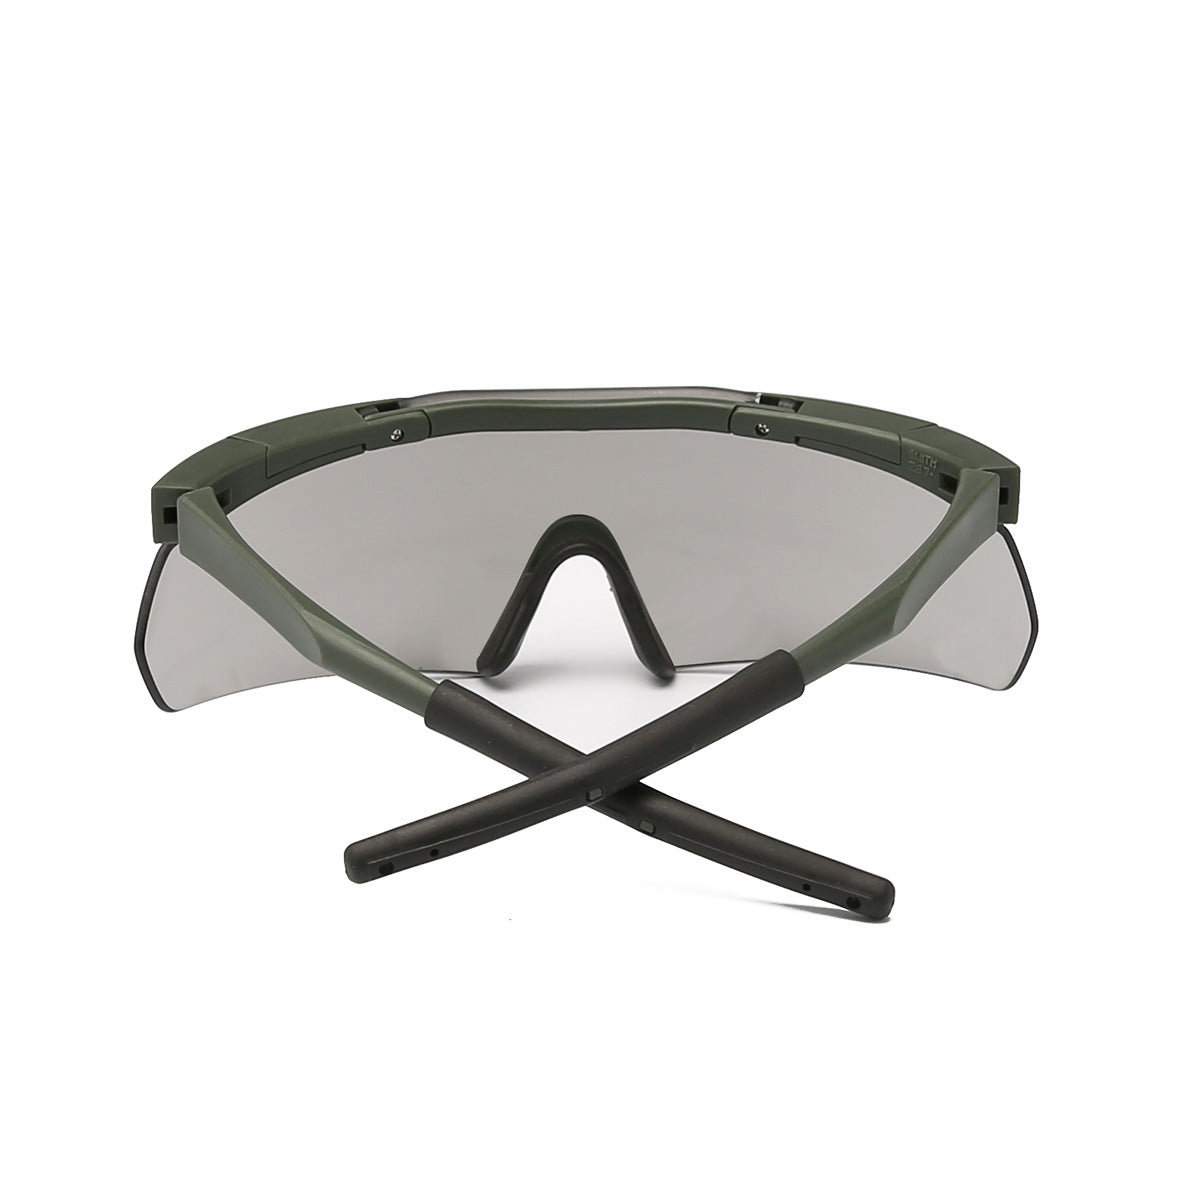 Sporty cycling sunglasses with 3 interchangeable color lenses